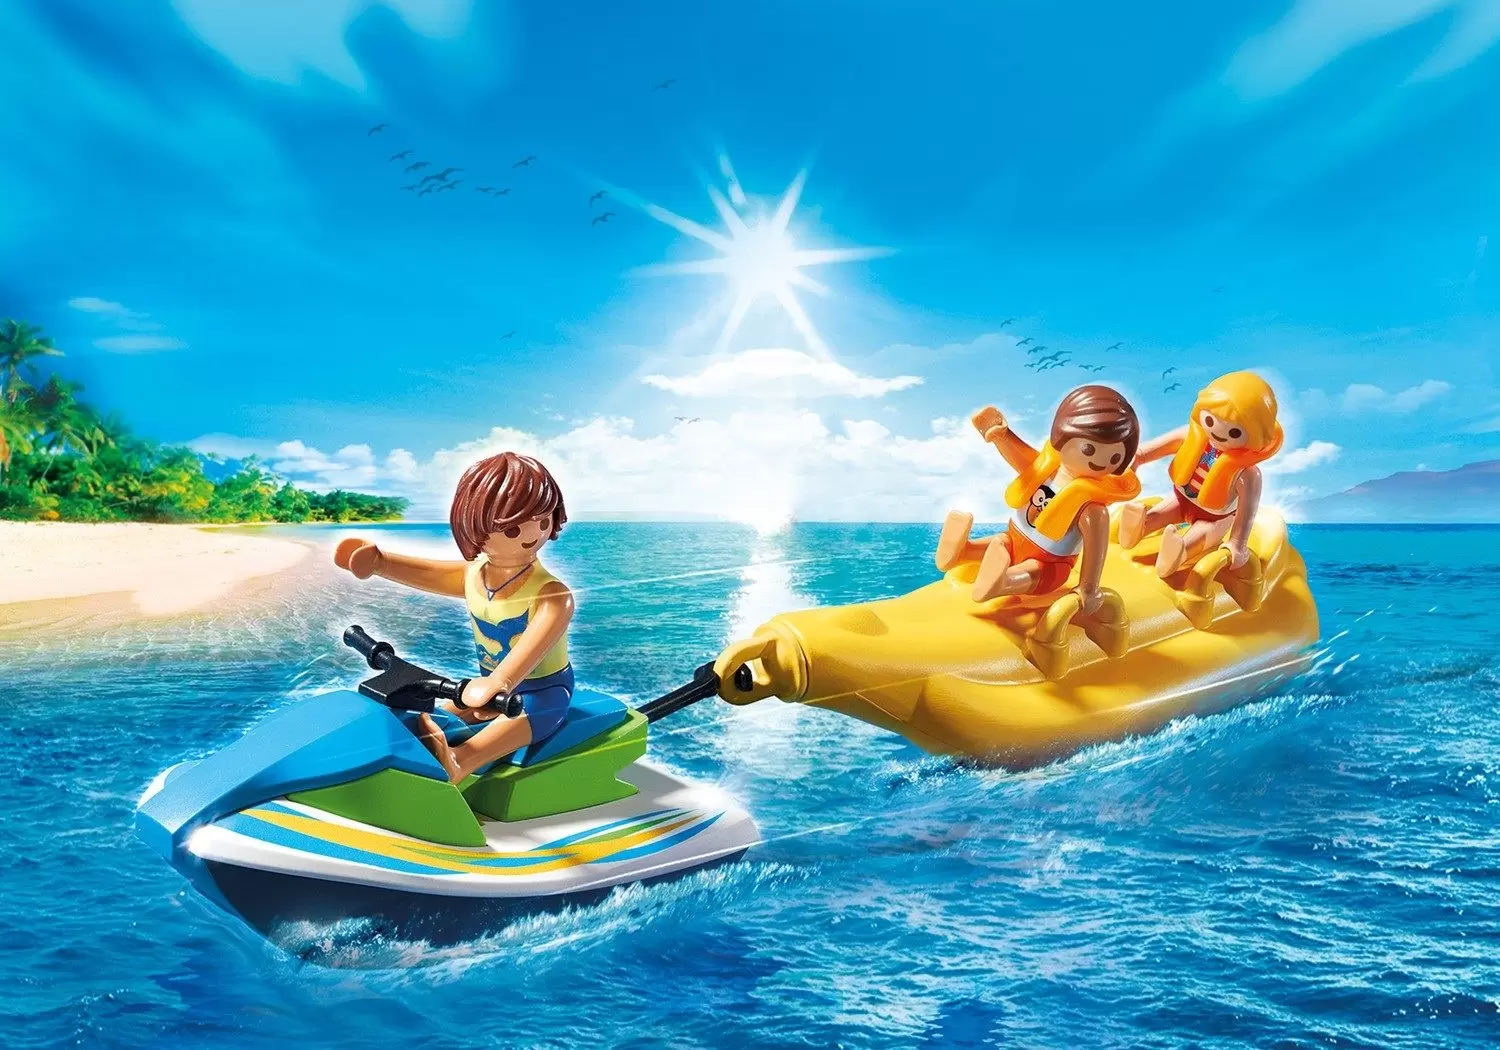 Playmobil on Hollidays - Personal Watercraft with Banana Boat